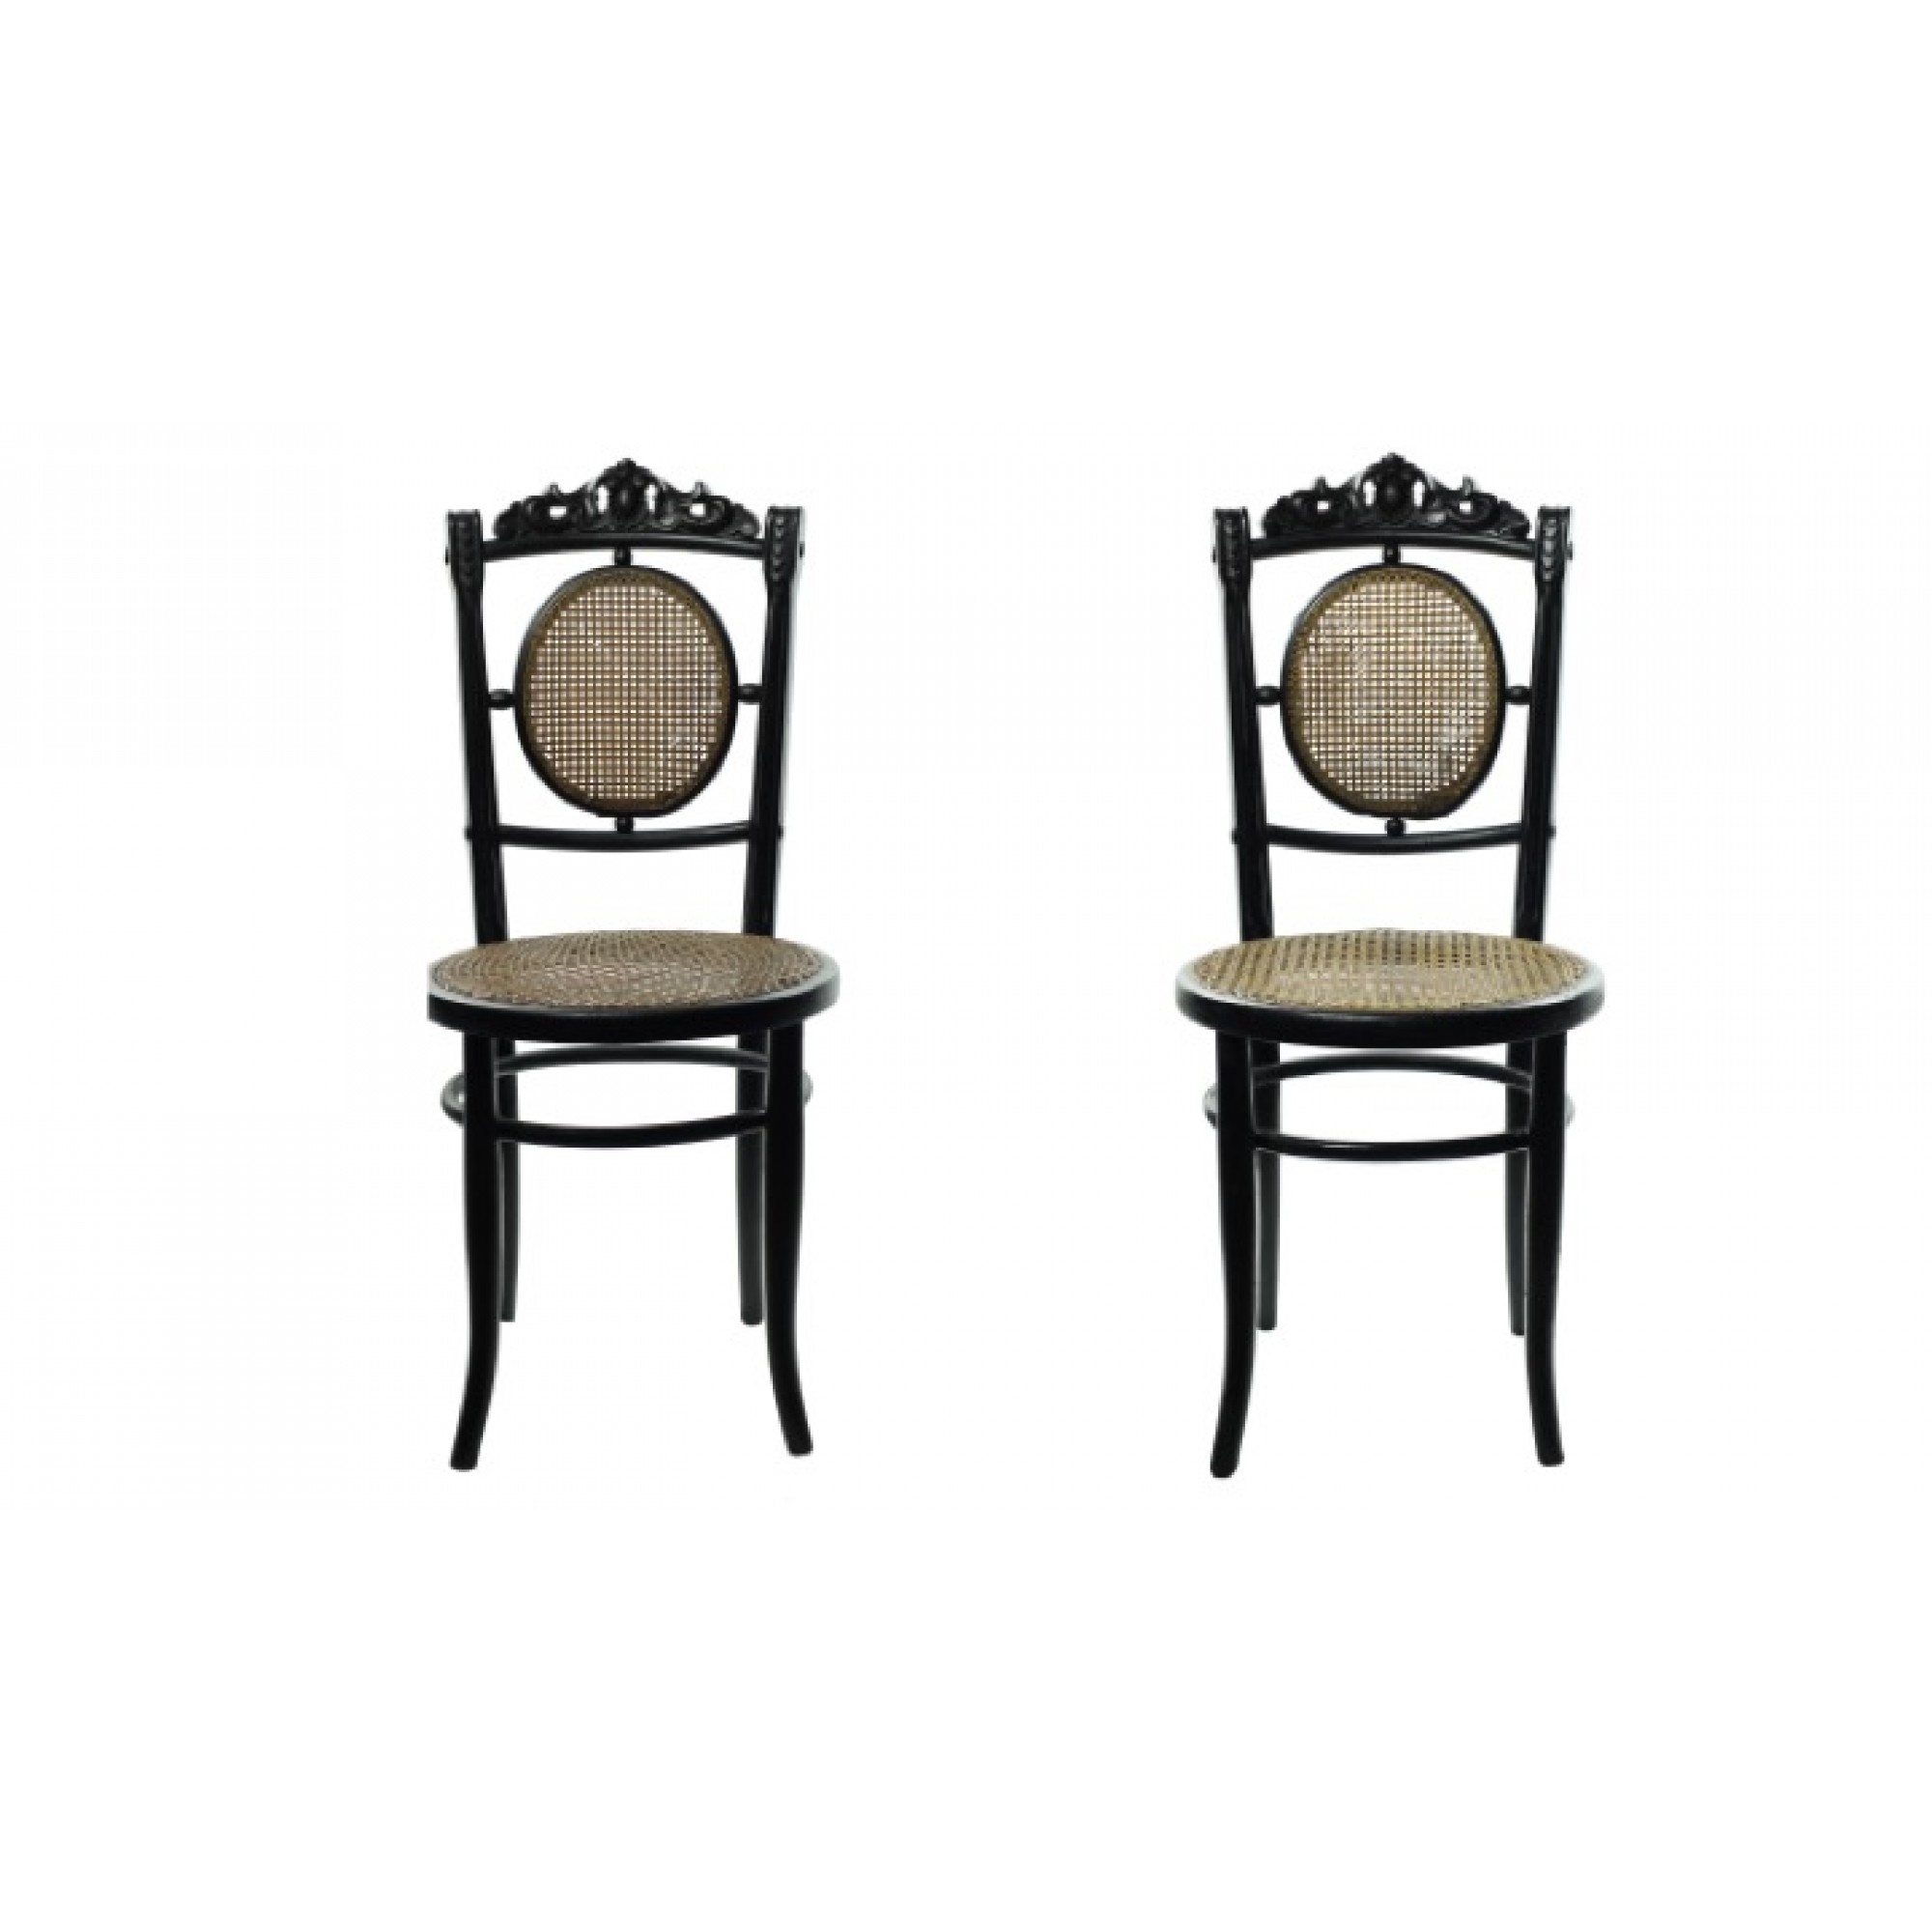 2 Works: Chairs by Michael Thonet, Late 19th century